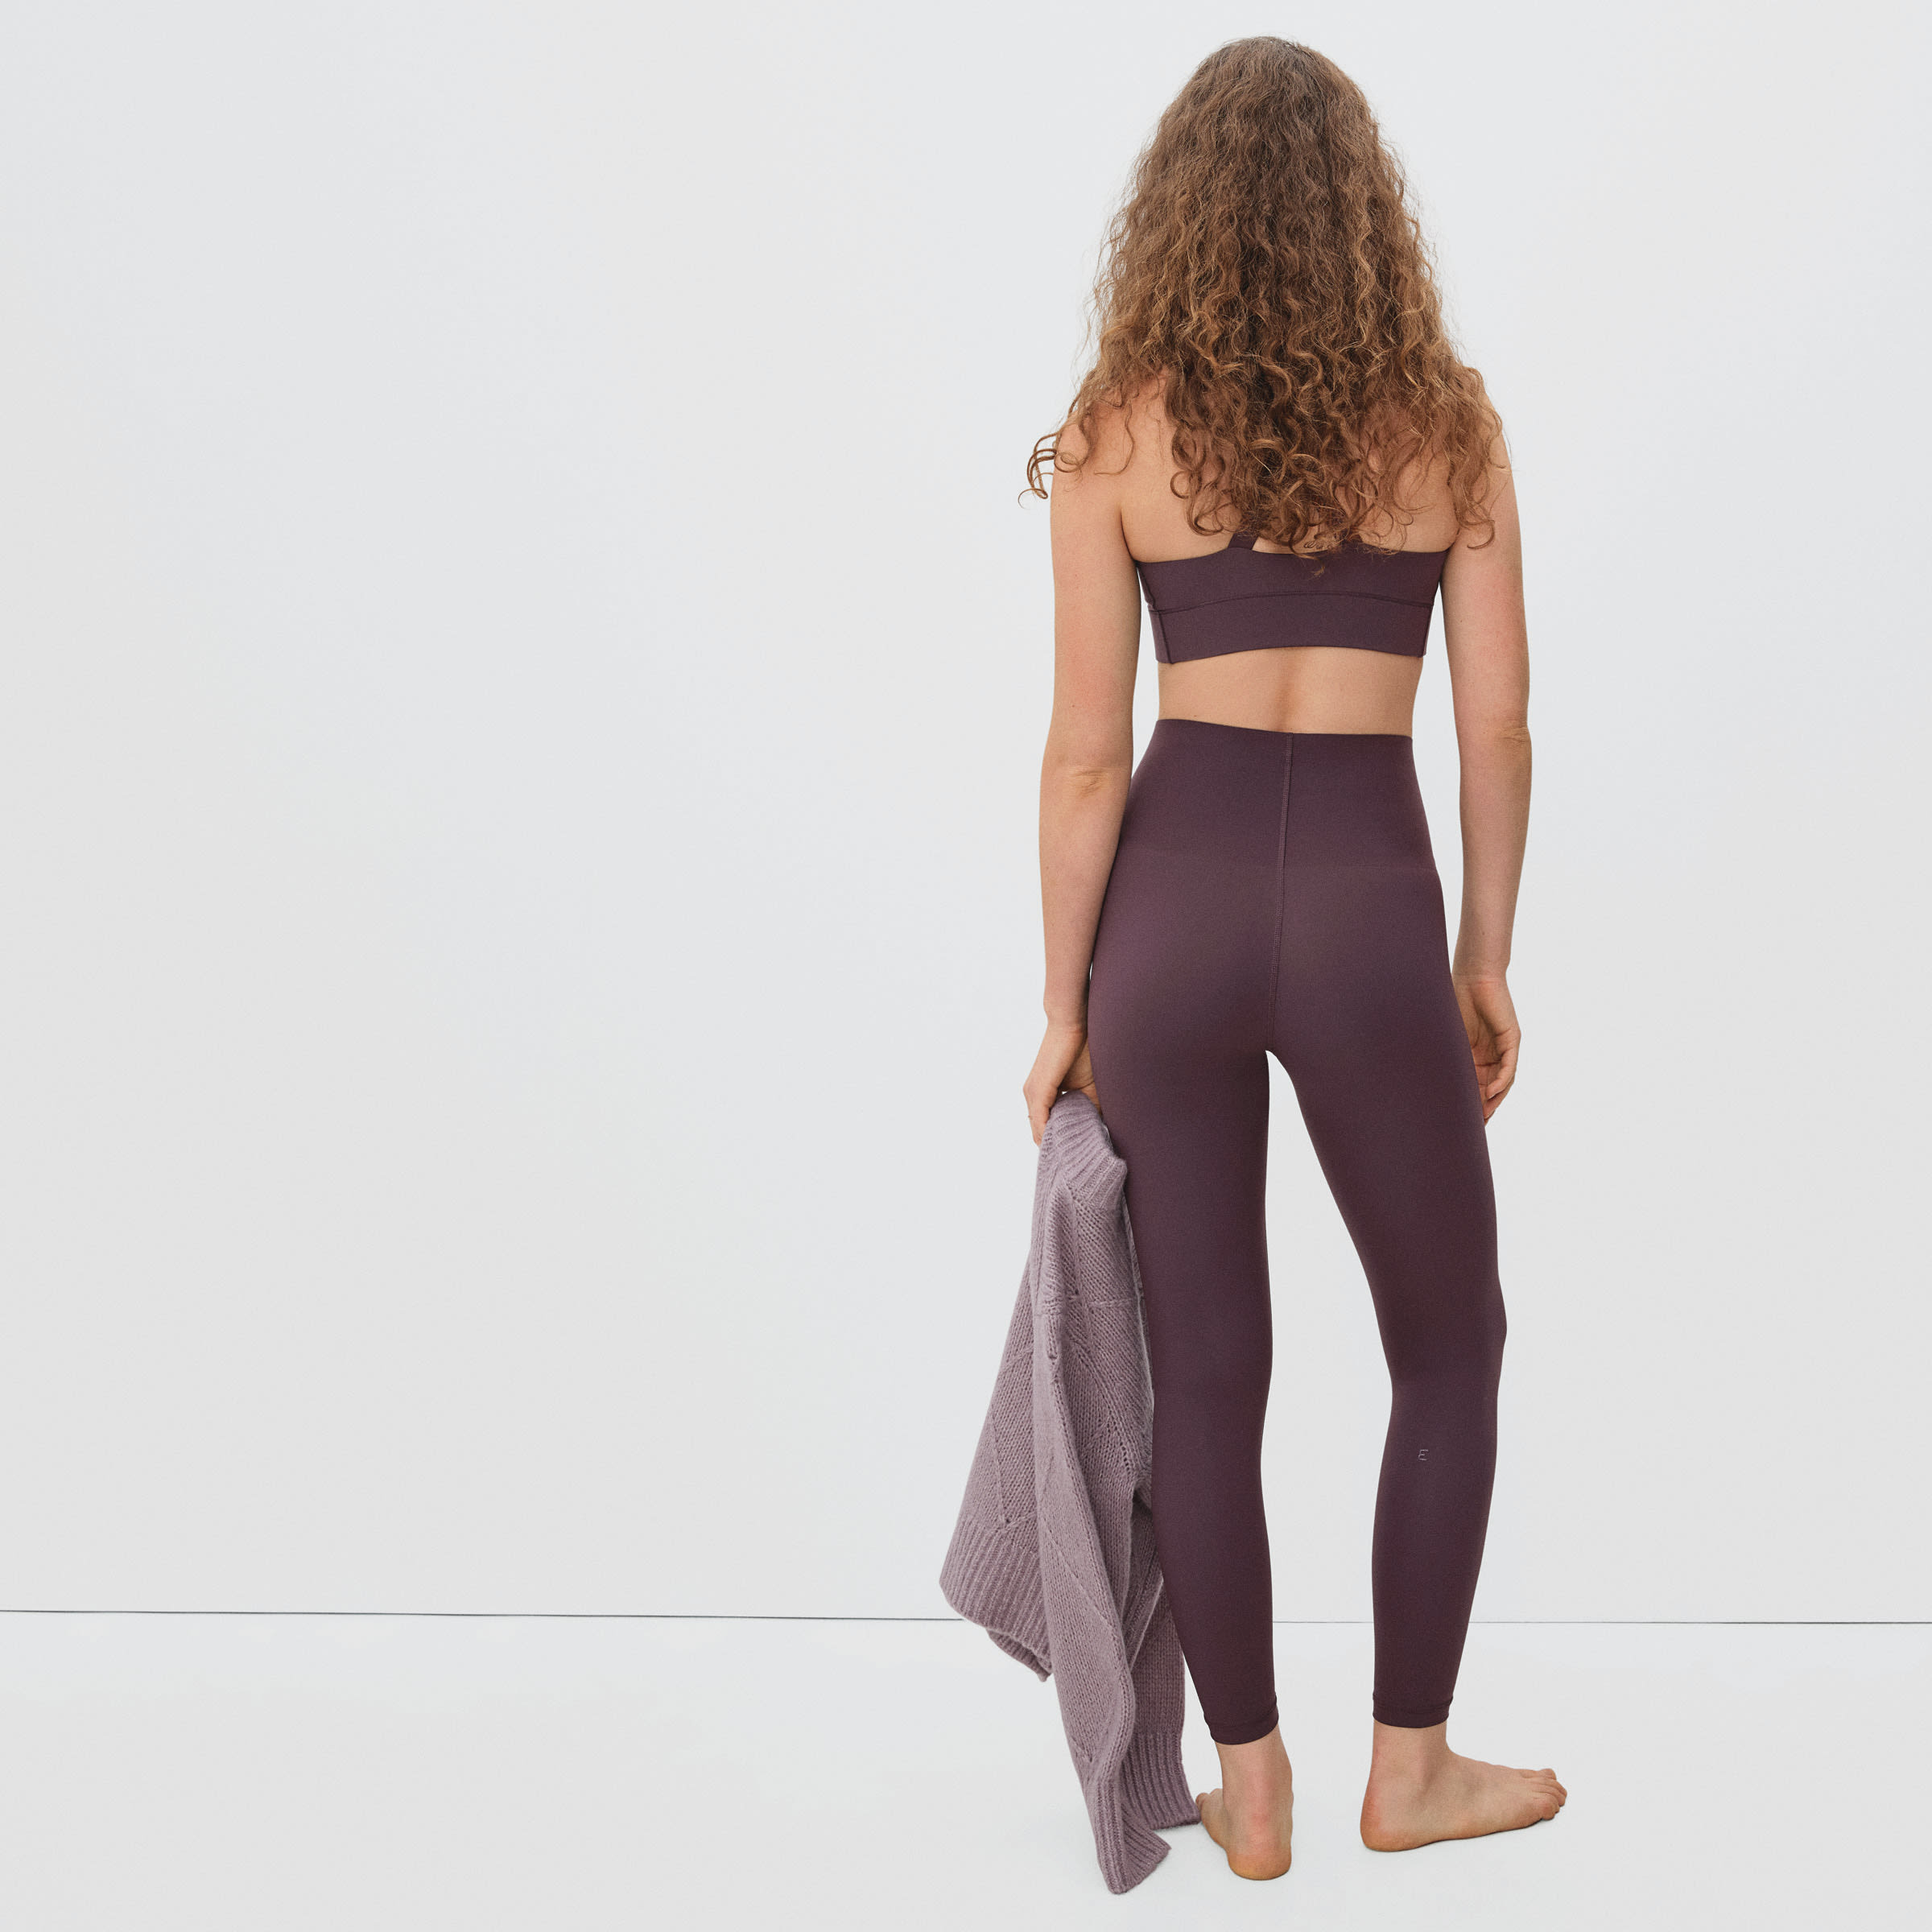 Everlane's New Workout Leggings Have an Editor's Seal of Approval